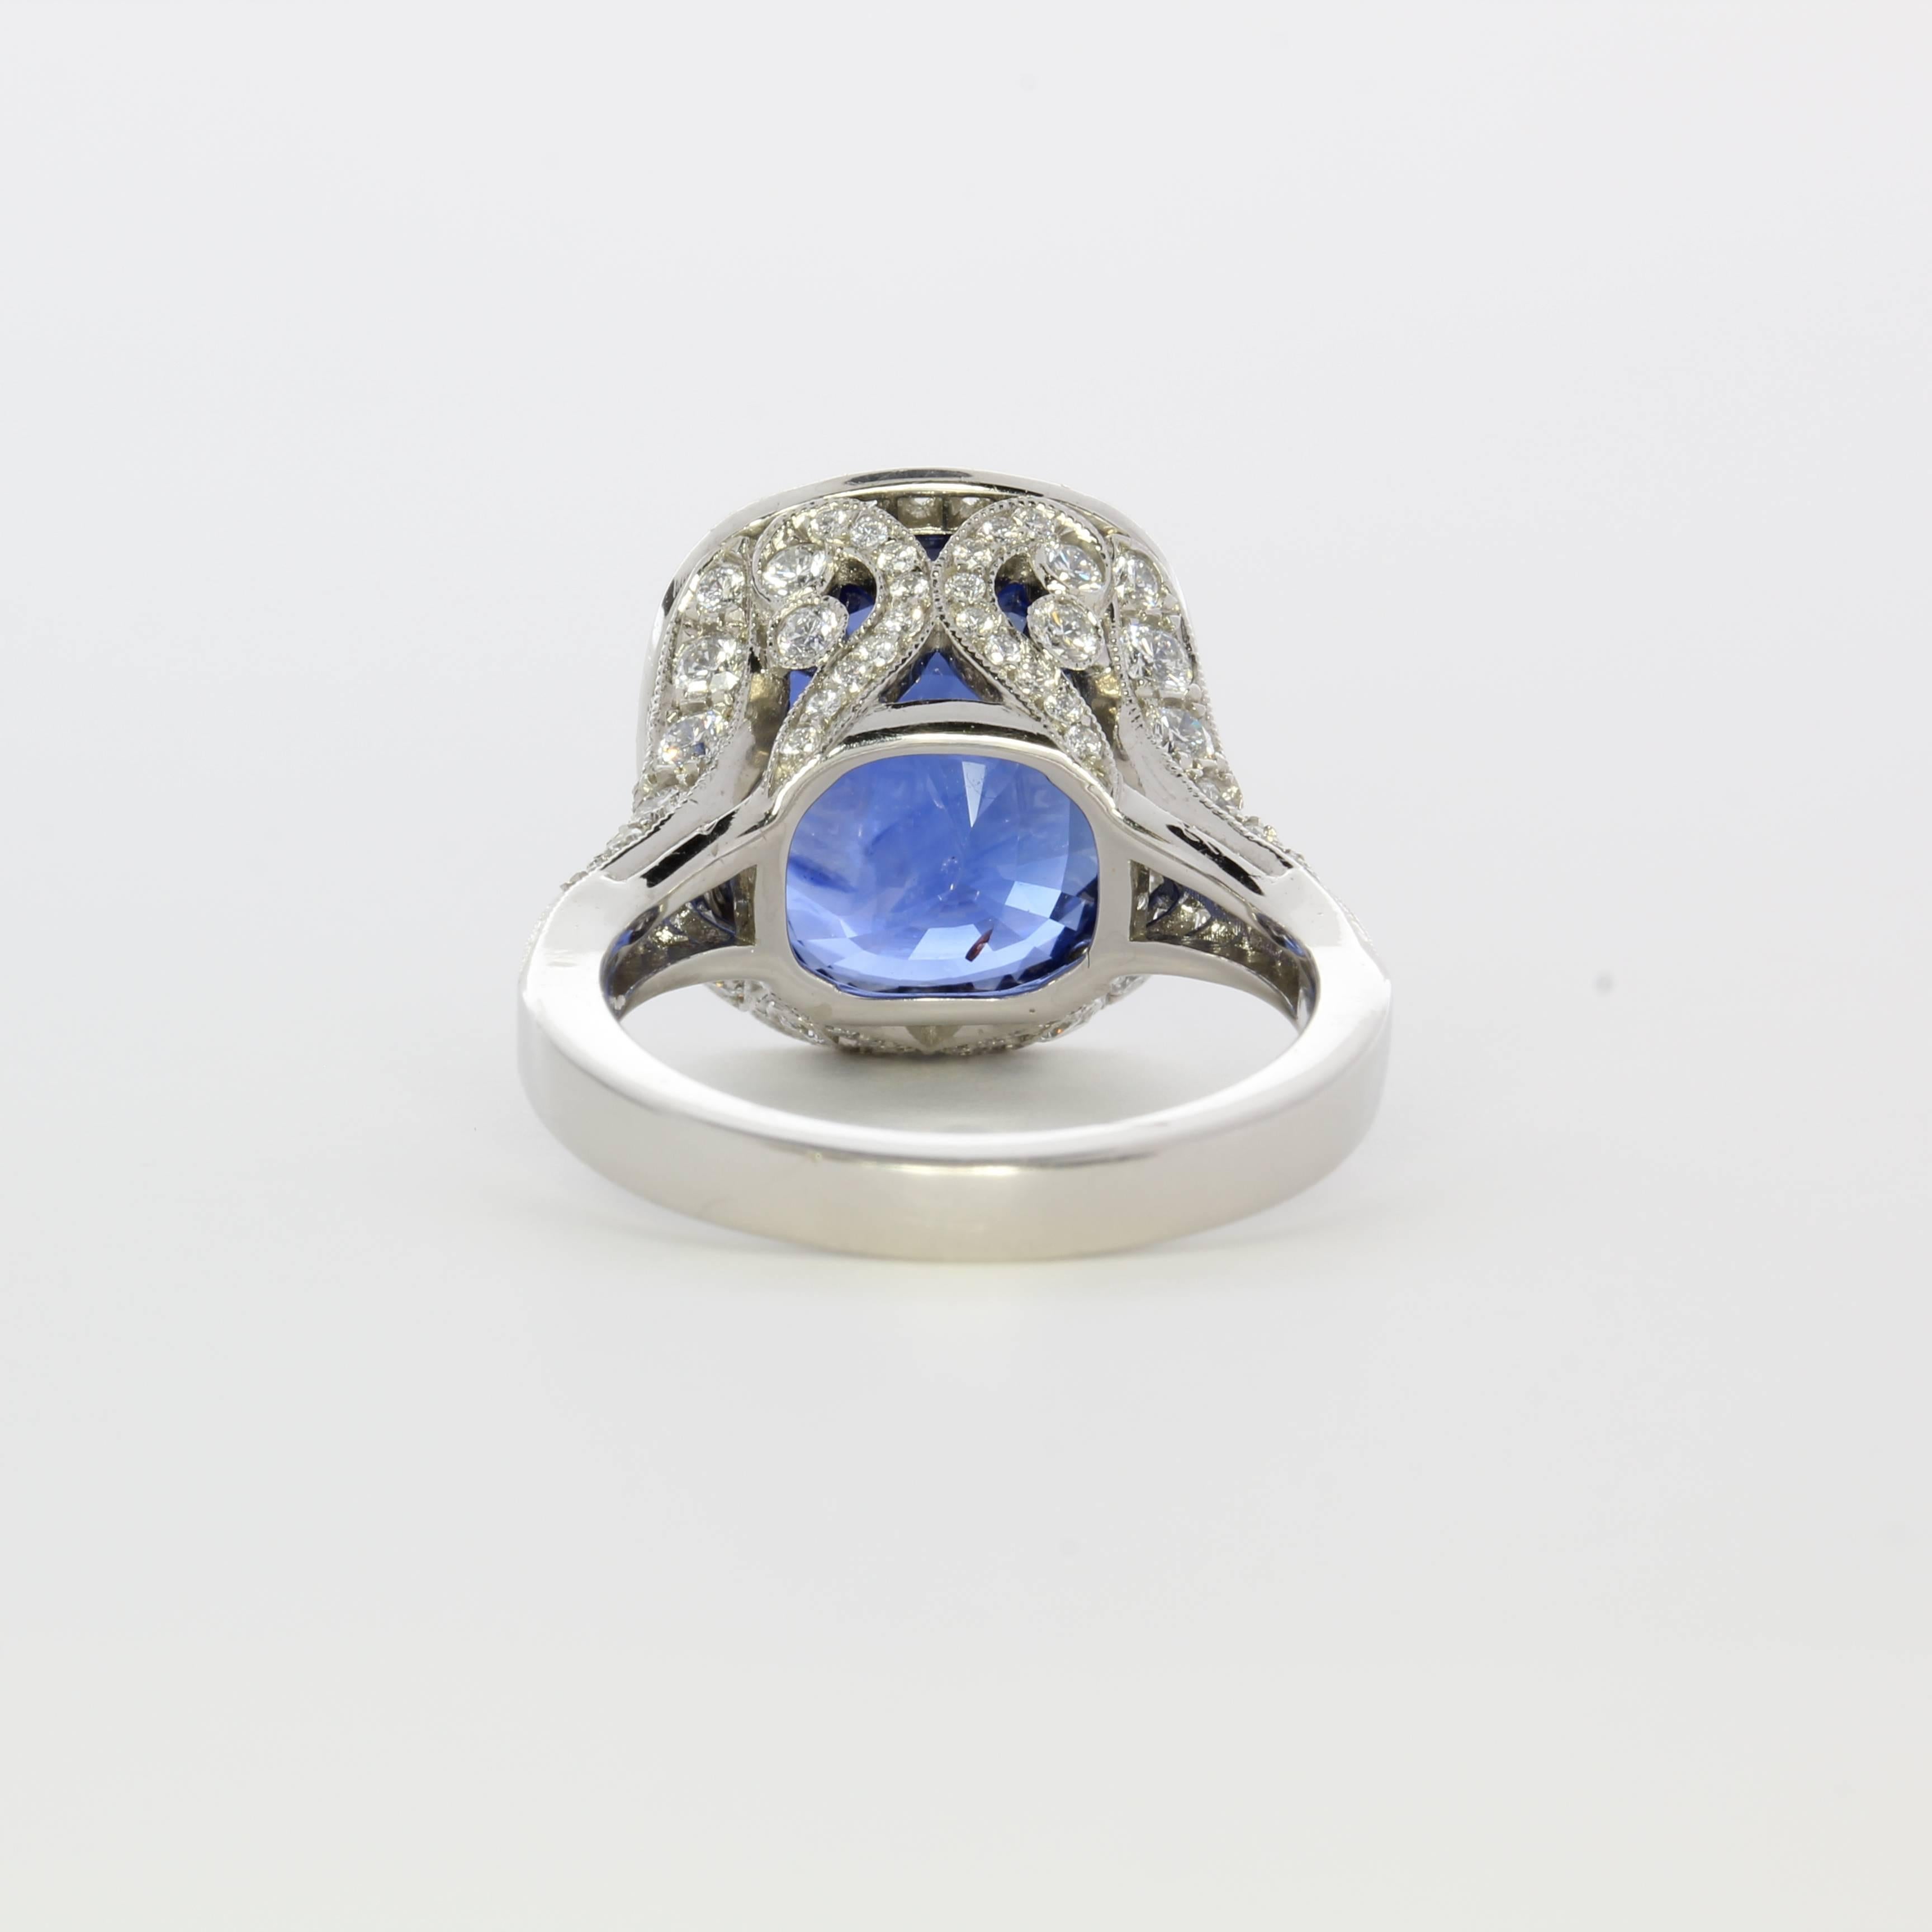 Natural sapphire from Madagascar, origin of the world’s finest gem sapphires.  Stunning handmade ring with unheated 12.41 carat cushion shaped sapphire, framed with 1.45 carats of diamonds, with square-cut and round diamonds on the band.   The